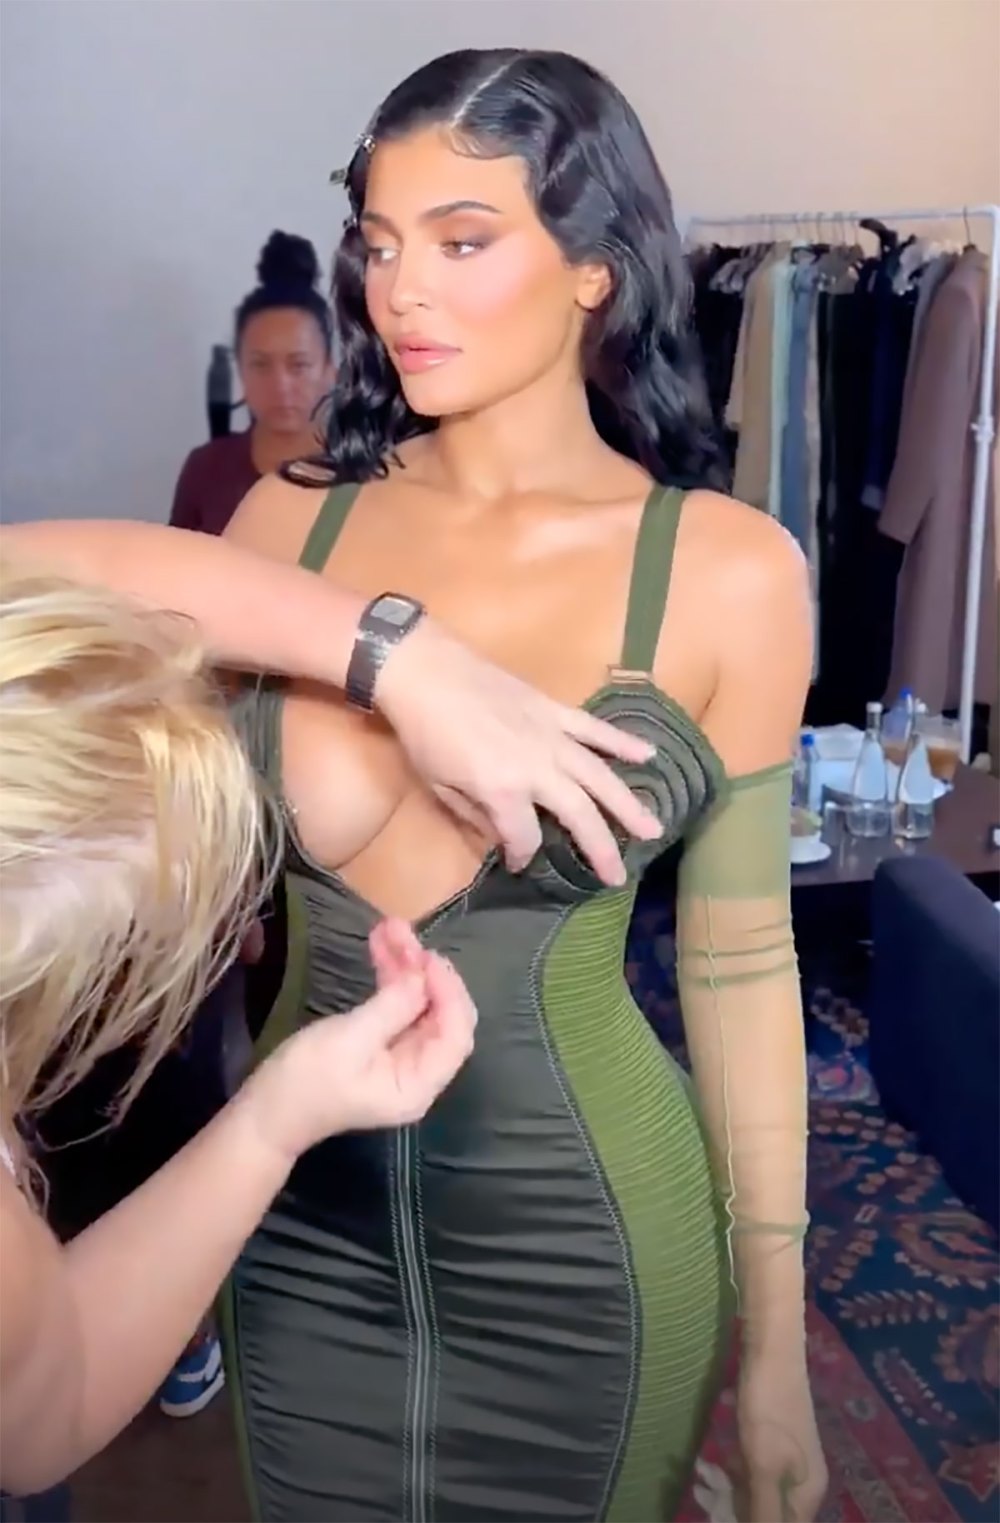 Kylie Jenner Was Hand-Sewn Into Her Vintage Dress for Red Carpet Appearance